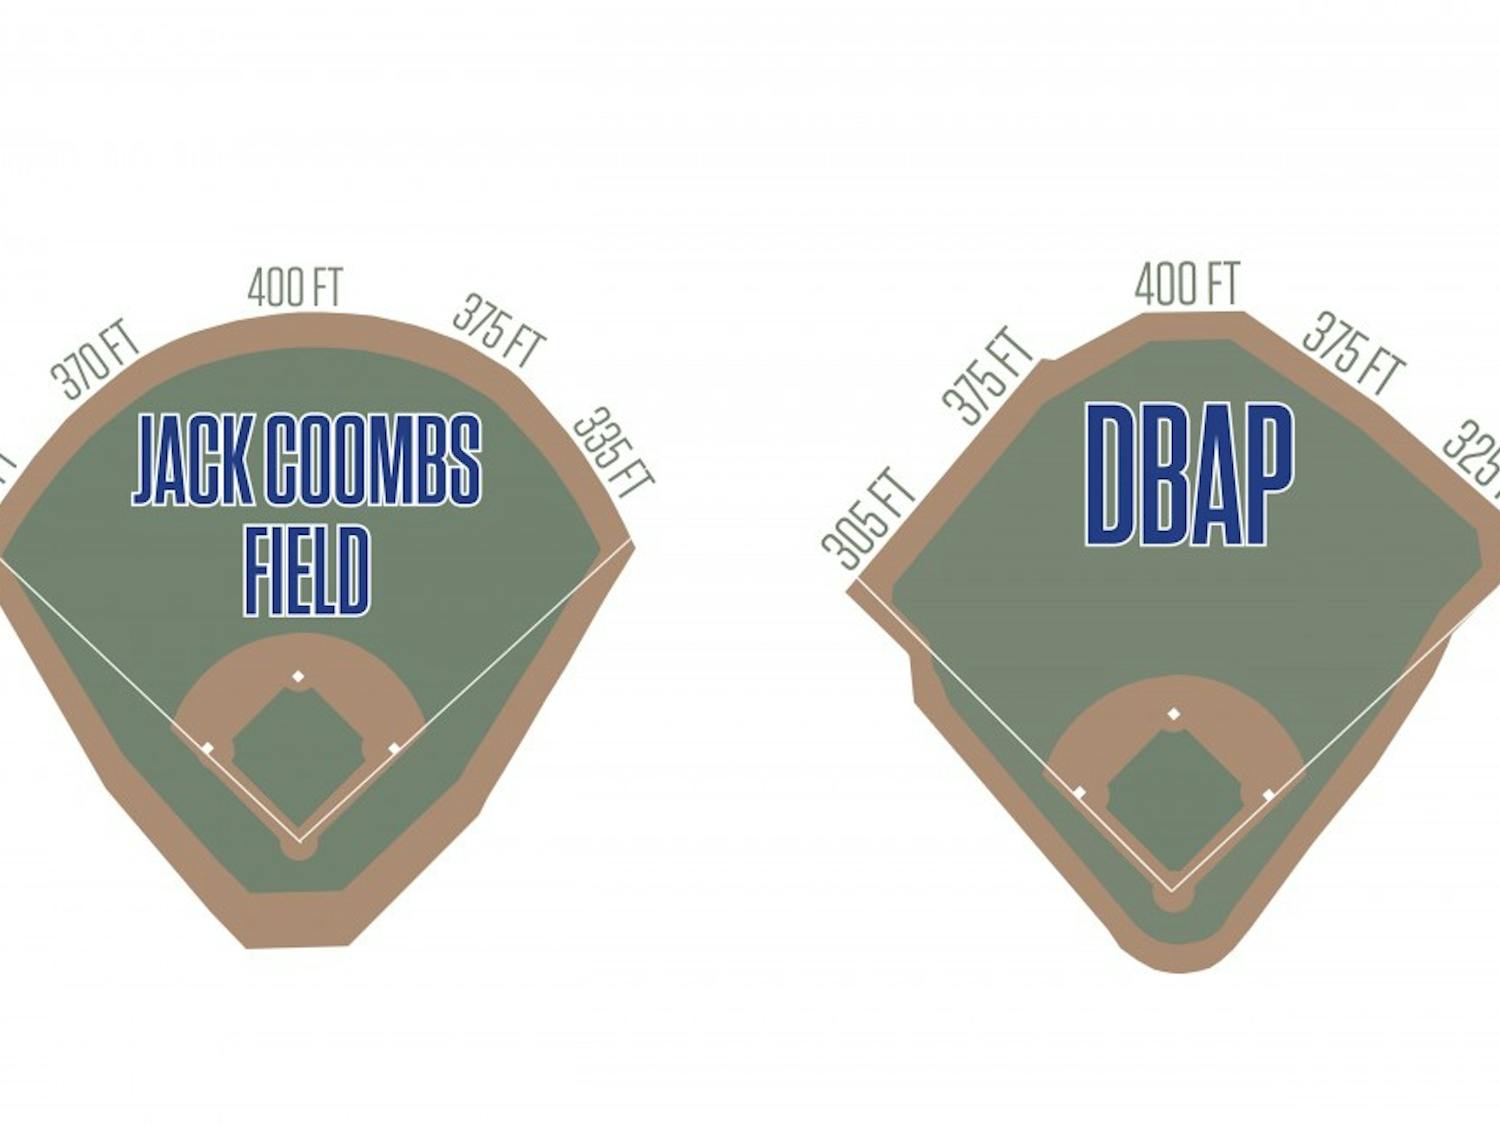 Duke will play 36 games per year at the DBAP starting in 2016, and has historically hit more home runs there than at the cavernous Jack Coombs Stadium.